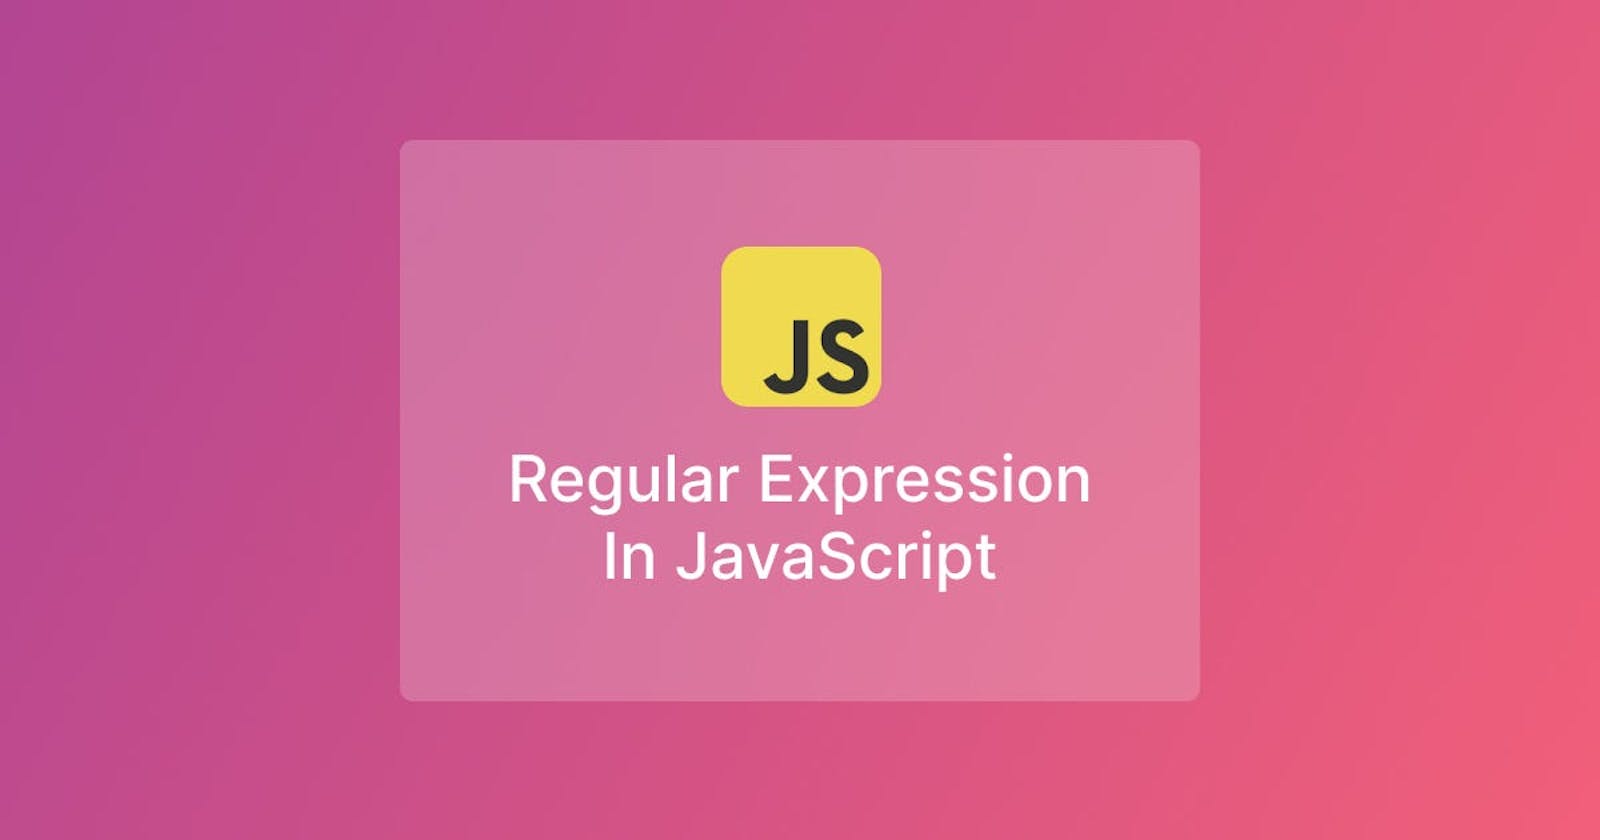 [JavaScript] Understanding the Regular Expression - Explained with Examples.